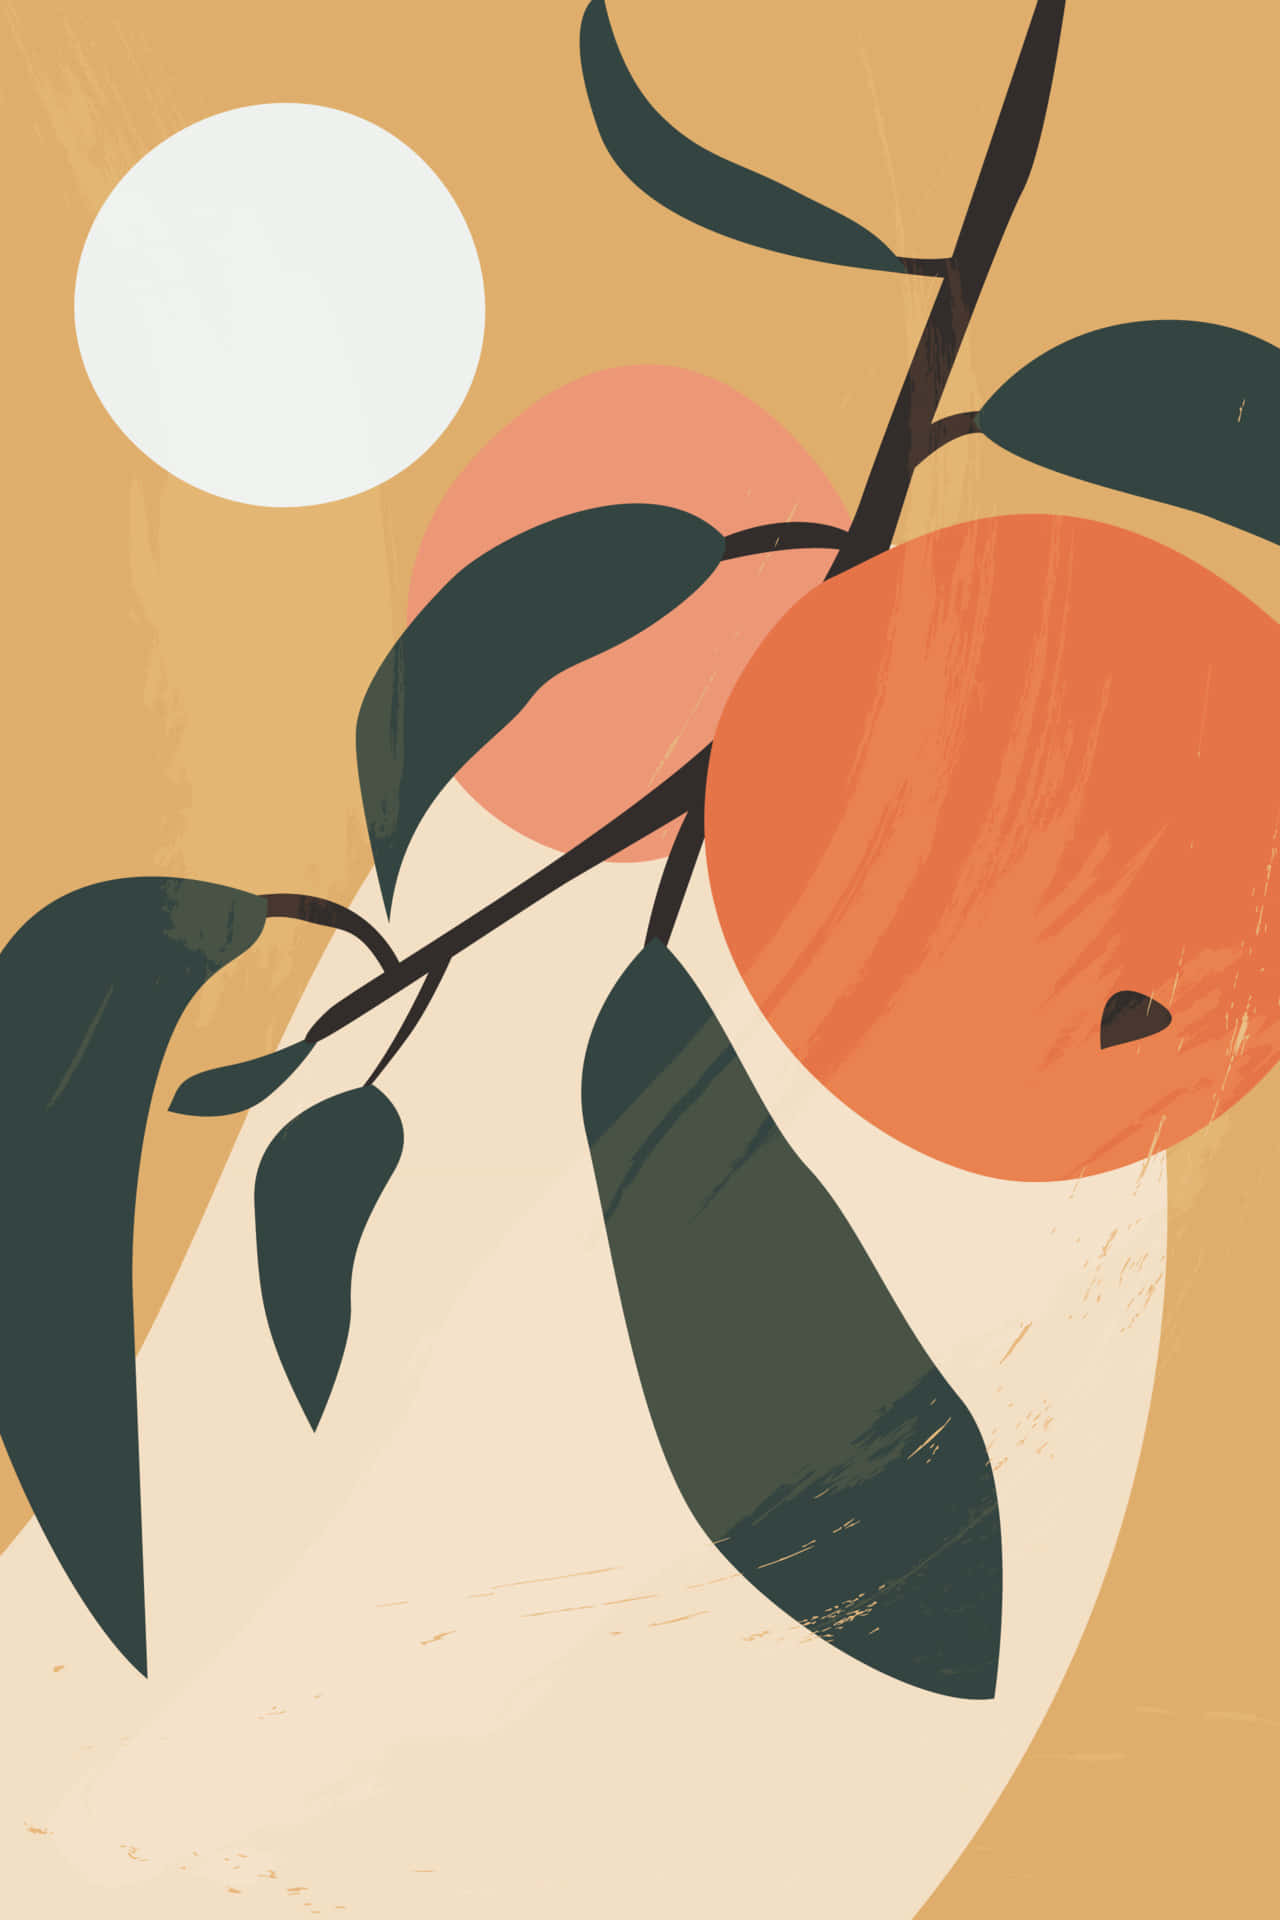 "Invoke sweetness with this stunning vintage peach wallpaper!" Wallpaper